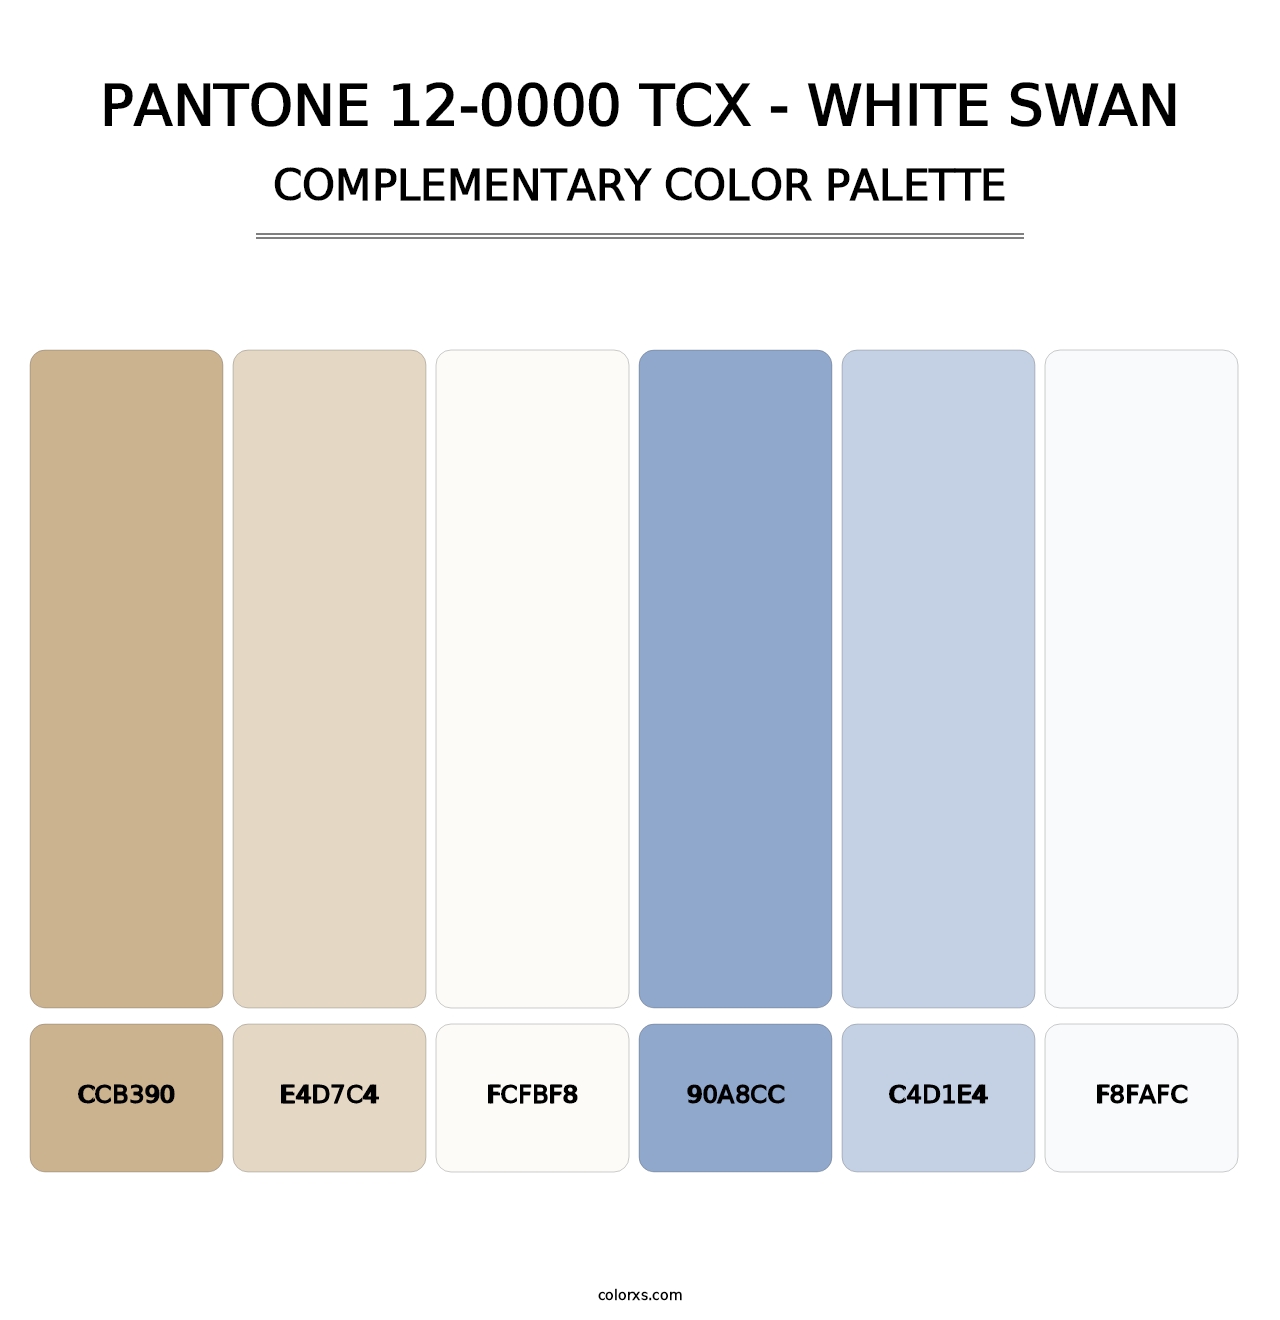 PANTONE 12-0000 TCX - White Swan - Complementary Color Palette